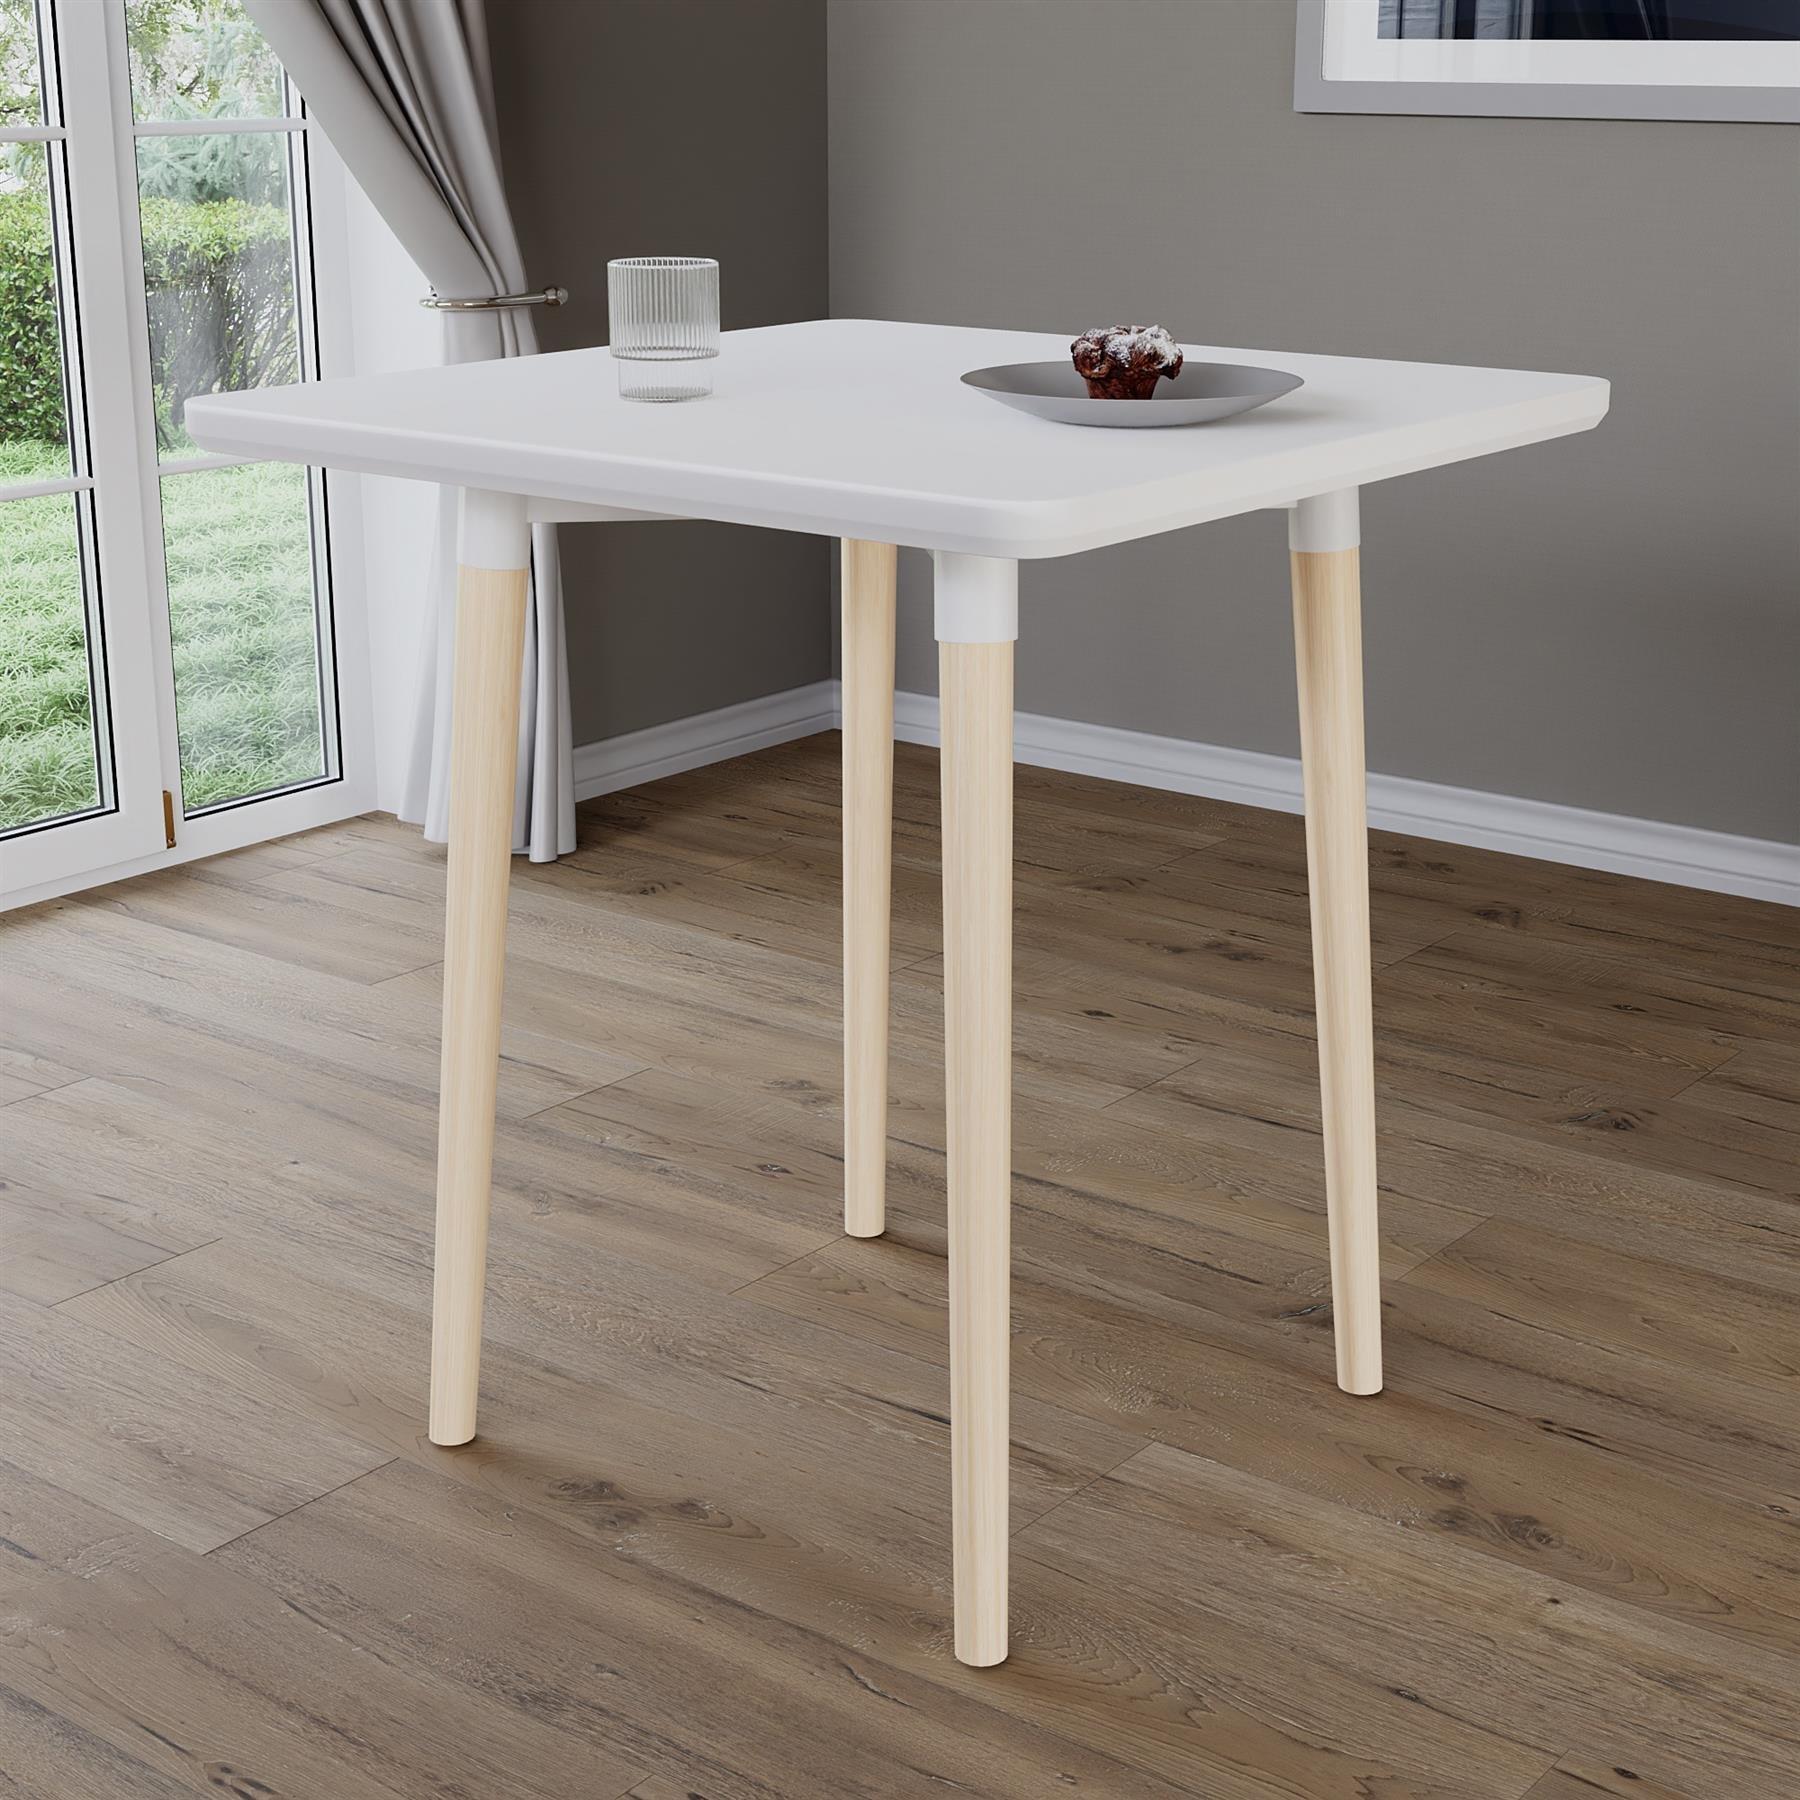 Vida Designs Batley 2 Seater Square Dining Table MDF Solid Beech Wood Dining Kitchen Furniture